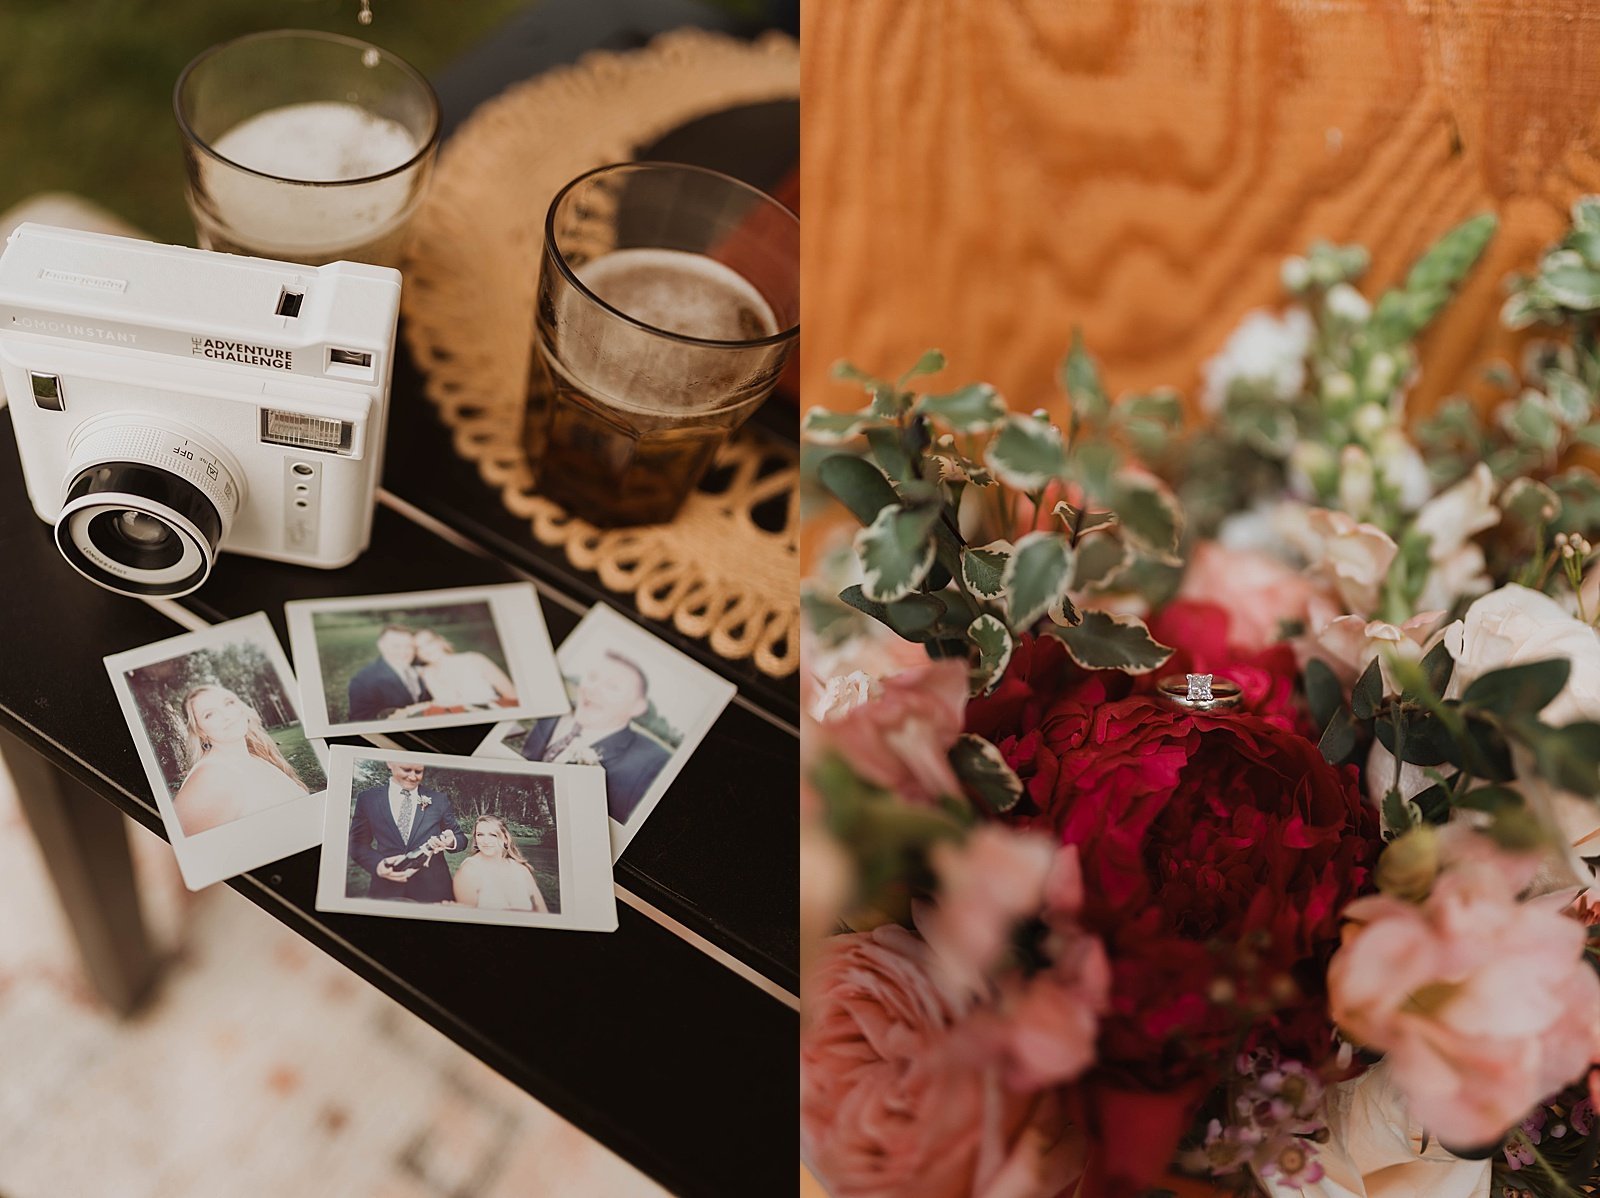  Polaroids on a picnic table at a 10 year vow renewal in Alaska.  